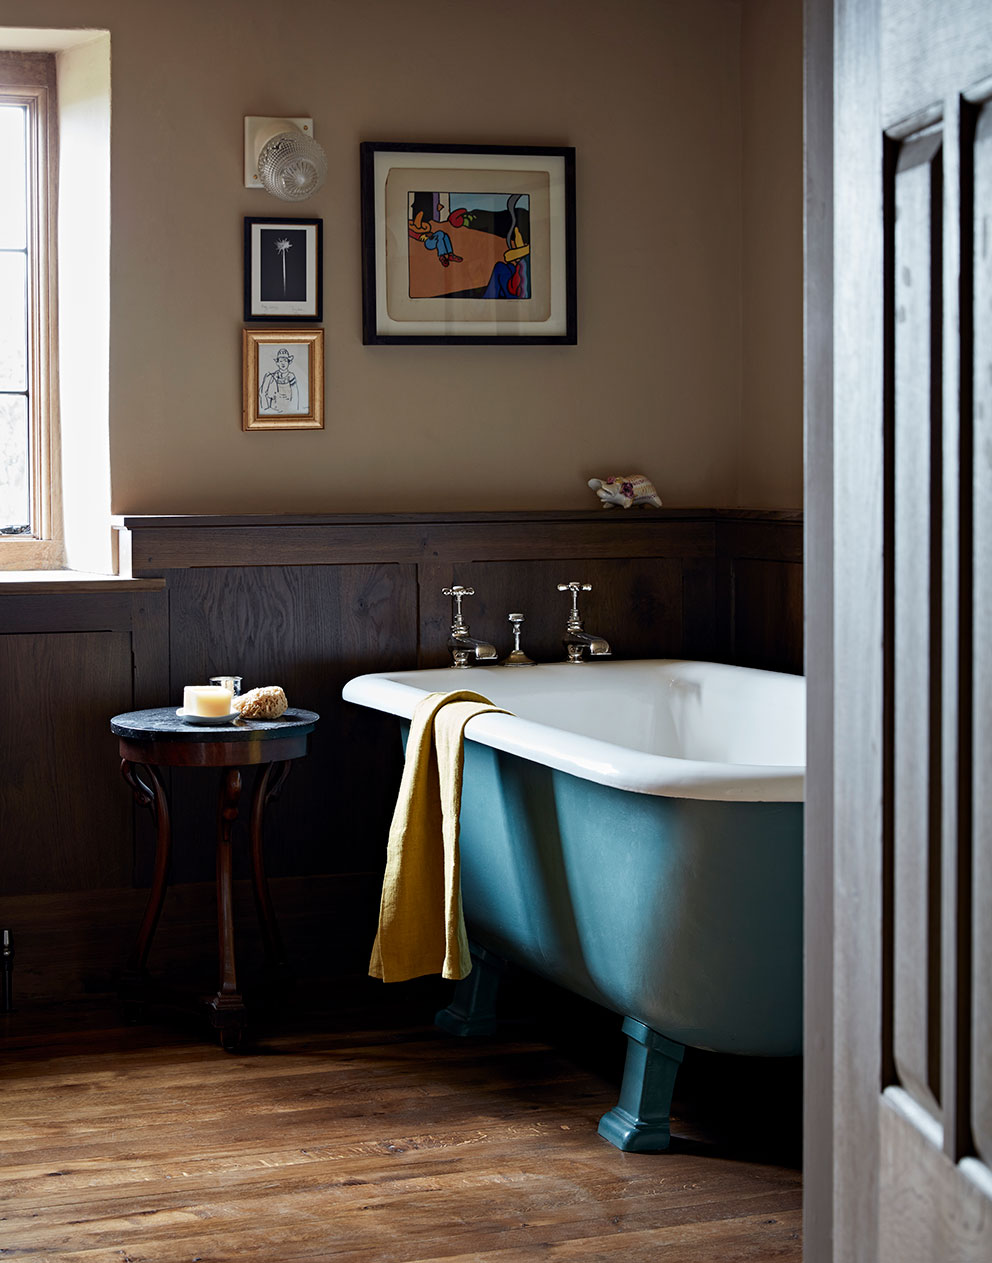 Bathroom in a luxury rural home with a stunning roll top bath surrounded by wood panelling and unique artworks.